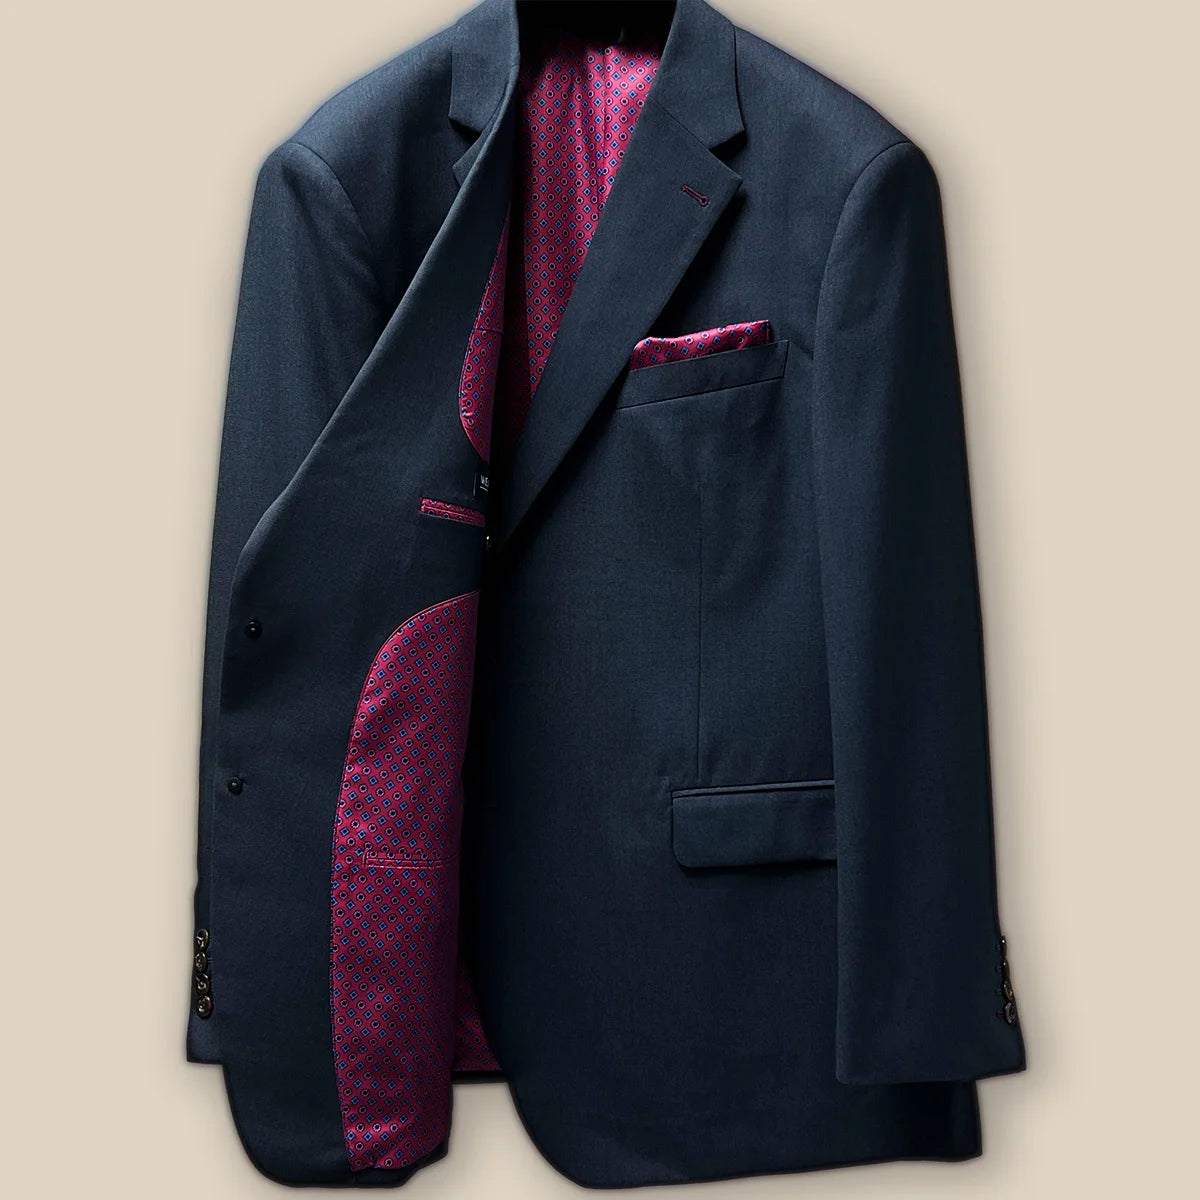 Inside right view of a charcoal grey suit jacket